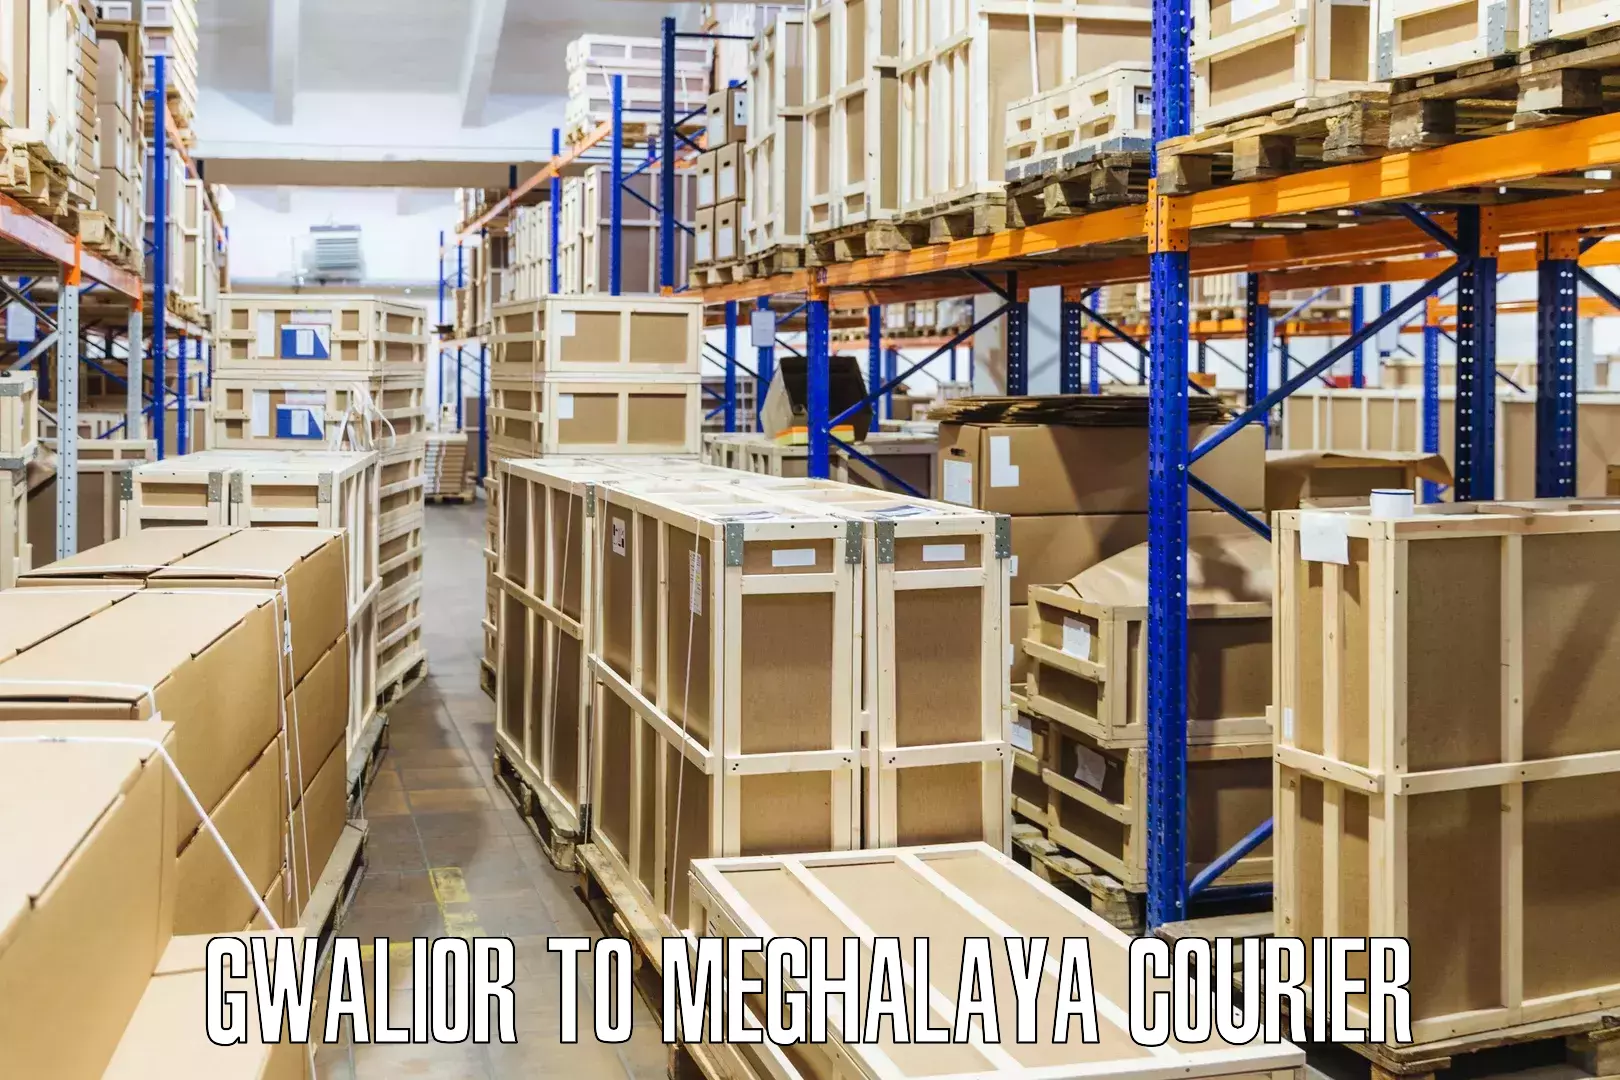 24-hour courier service Gwalior to Meghalaya